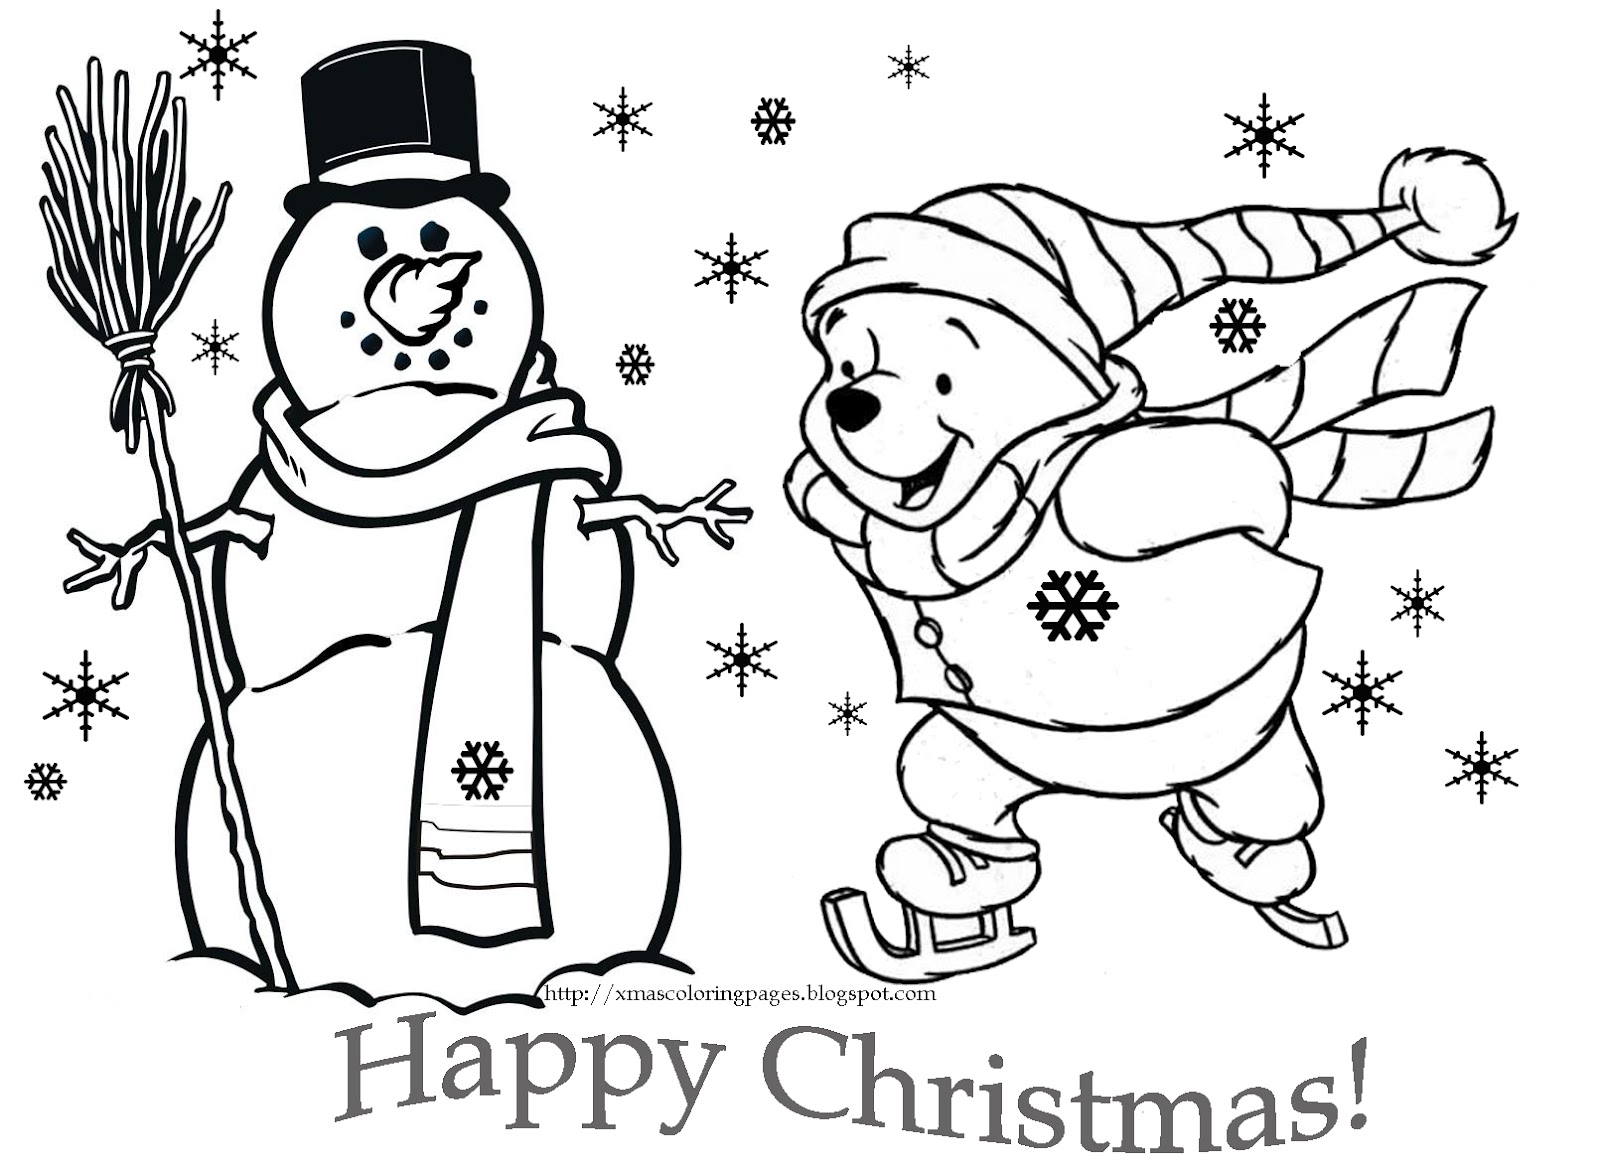 Christmas Online Coloring Pages Page 1 The Color - free coloring pages christmas